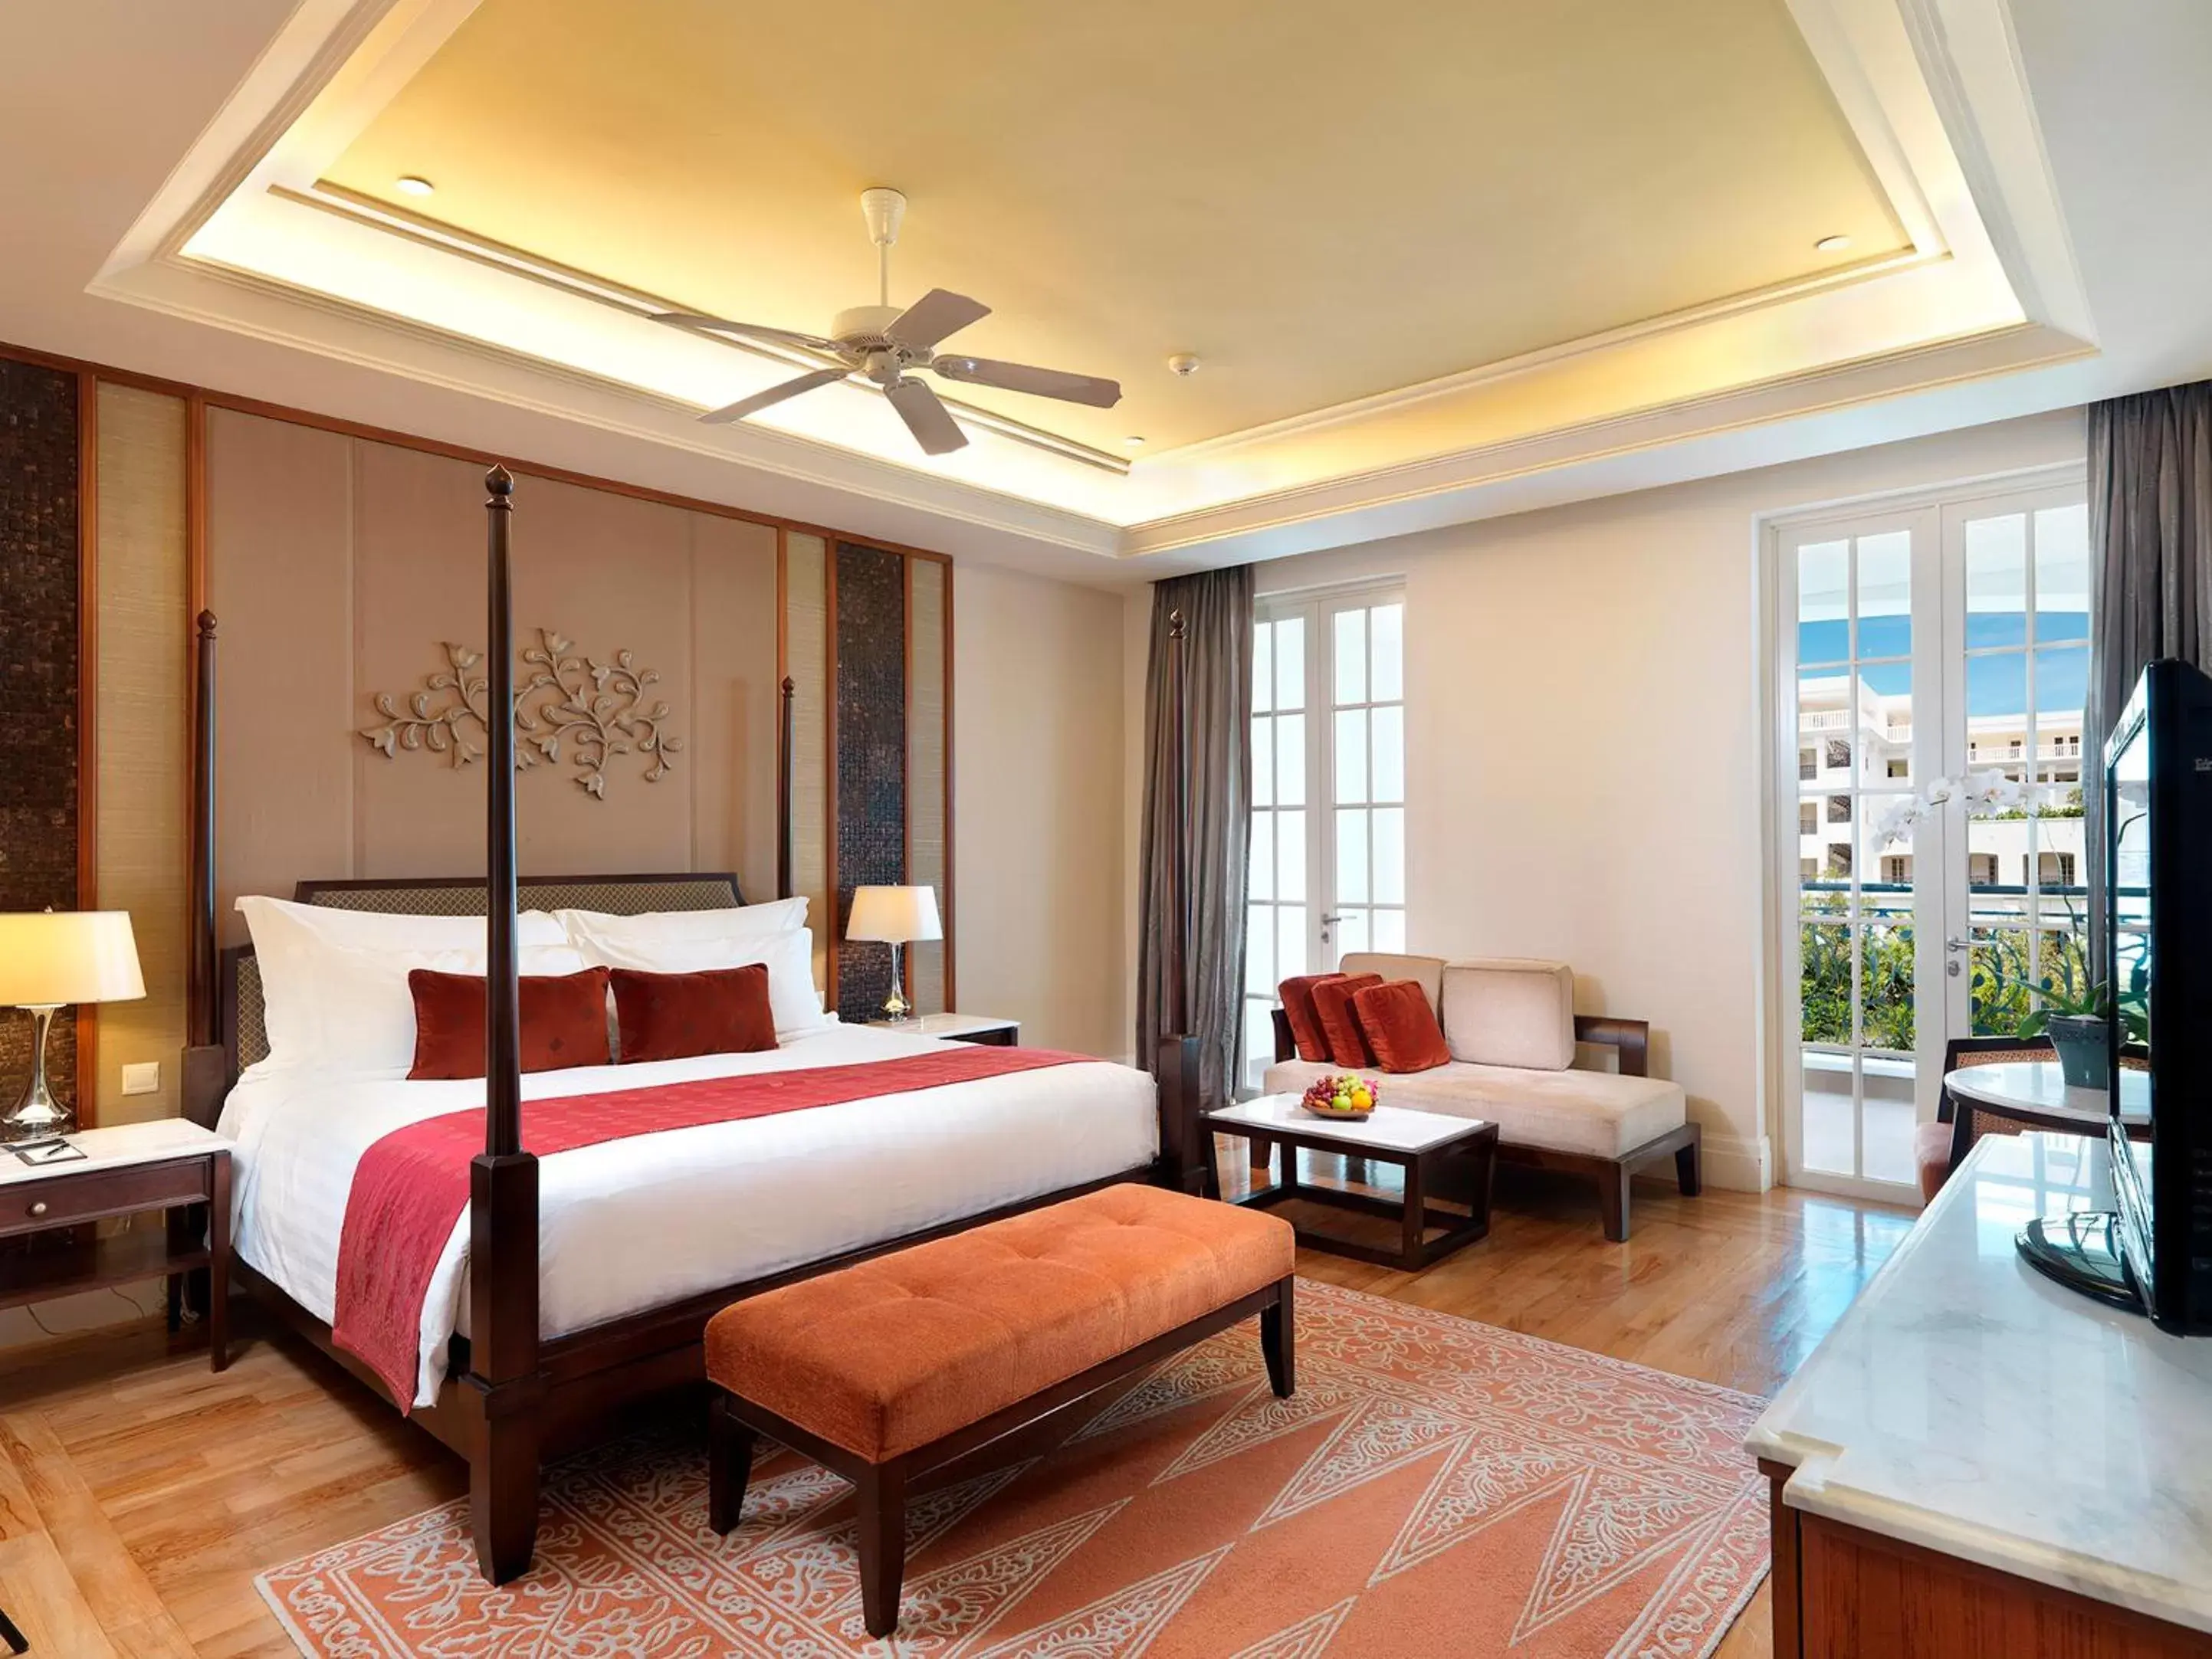 Bedroom in The Danna Langkawi - A Member of Small Luxury Hotels of the World